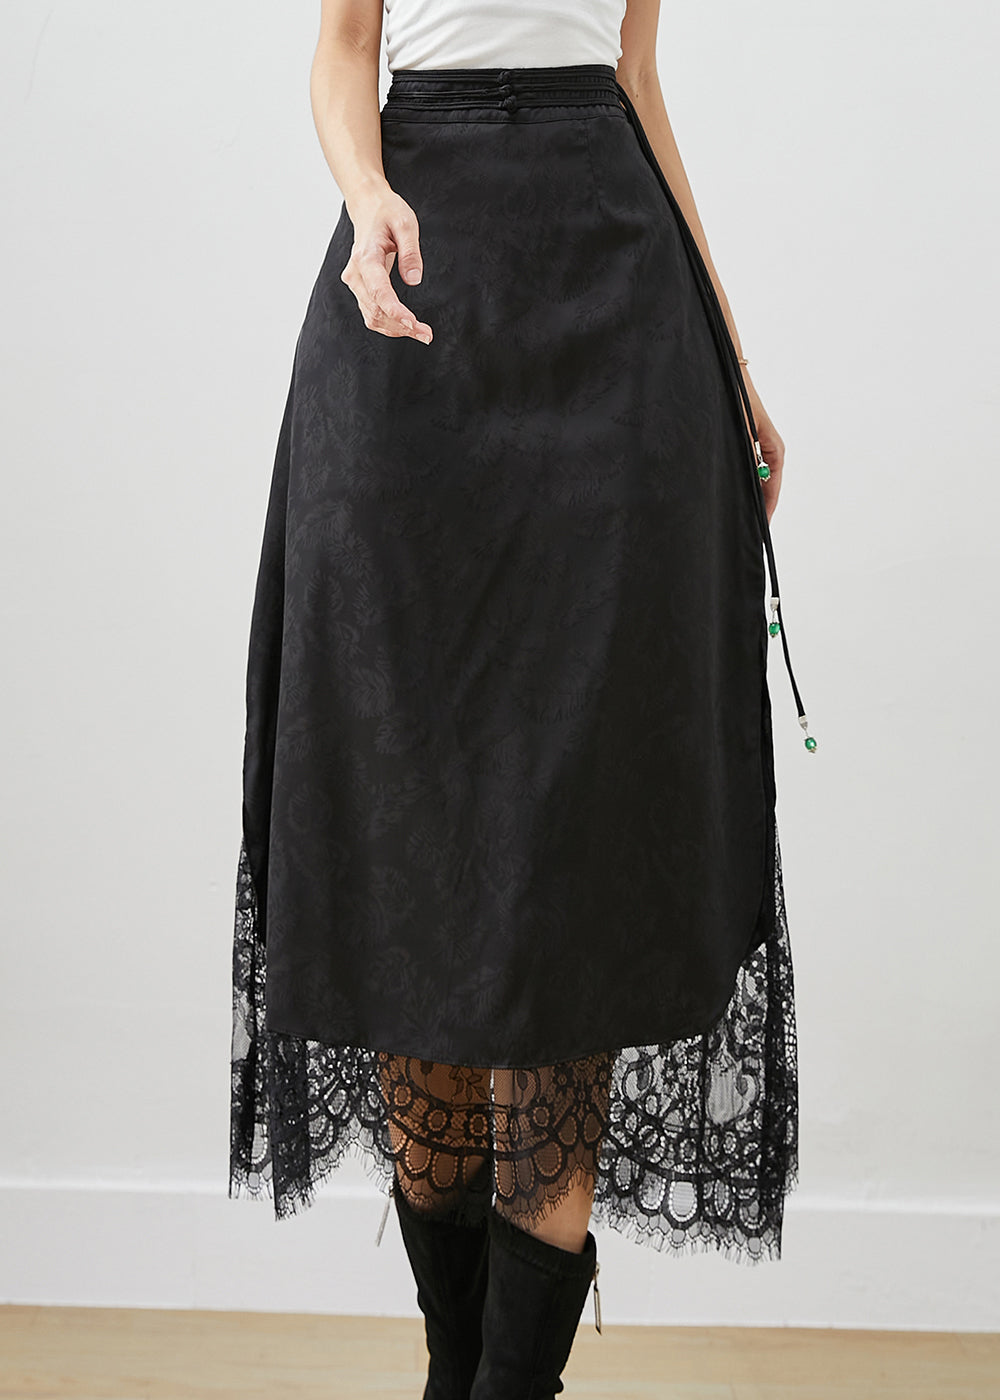 French Black Tasseled Patchwork Lace Silk Skirt Fall